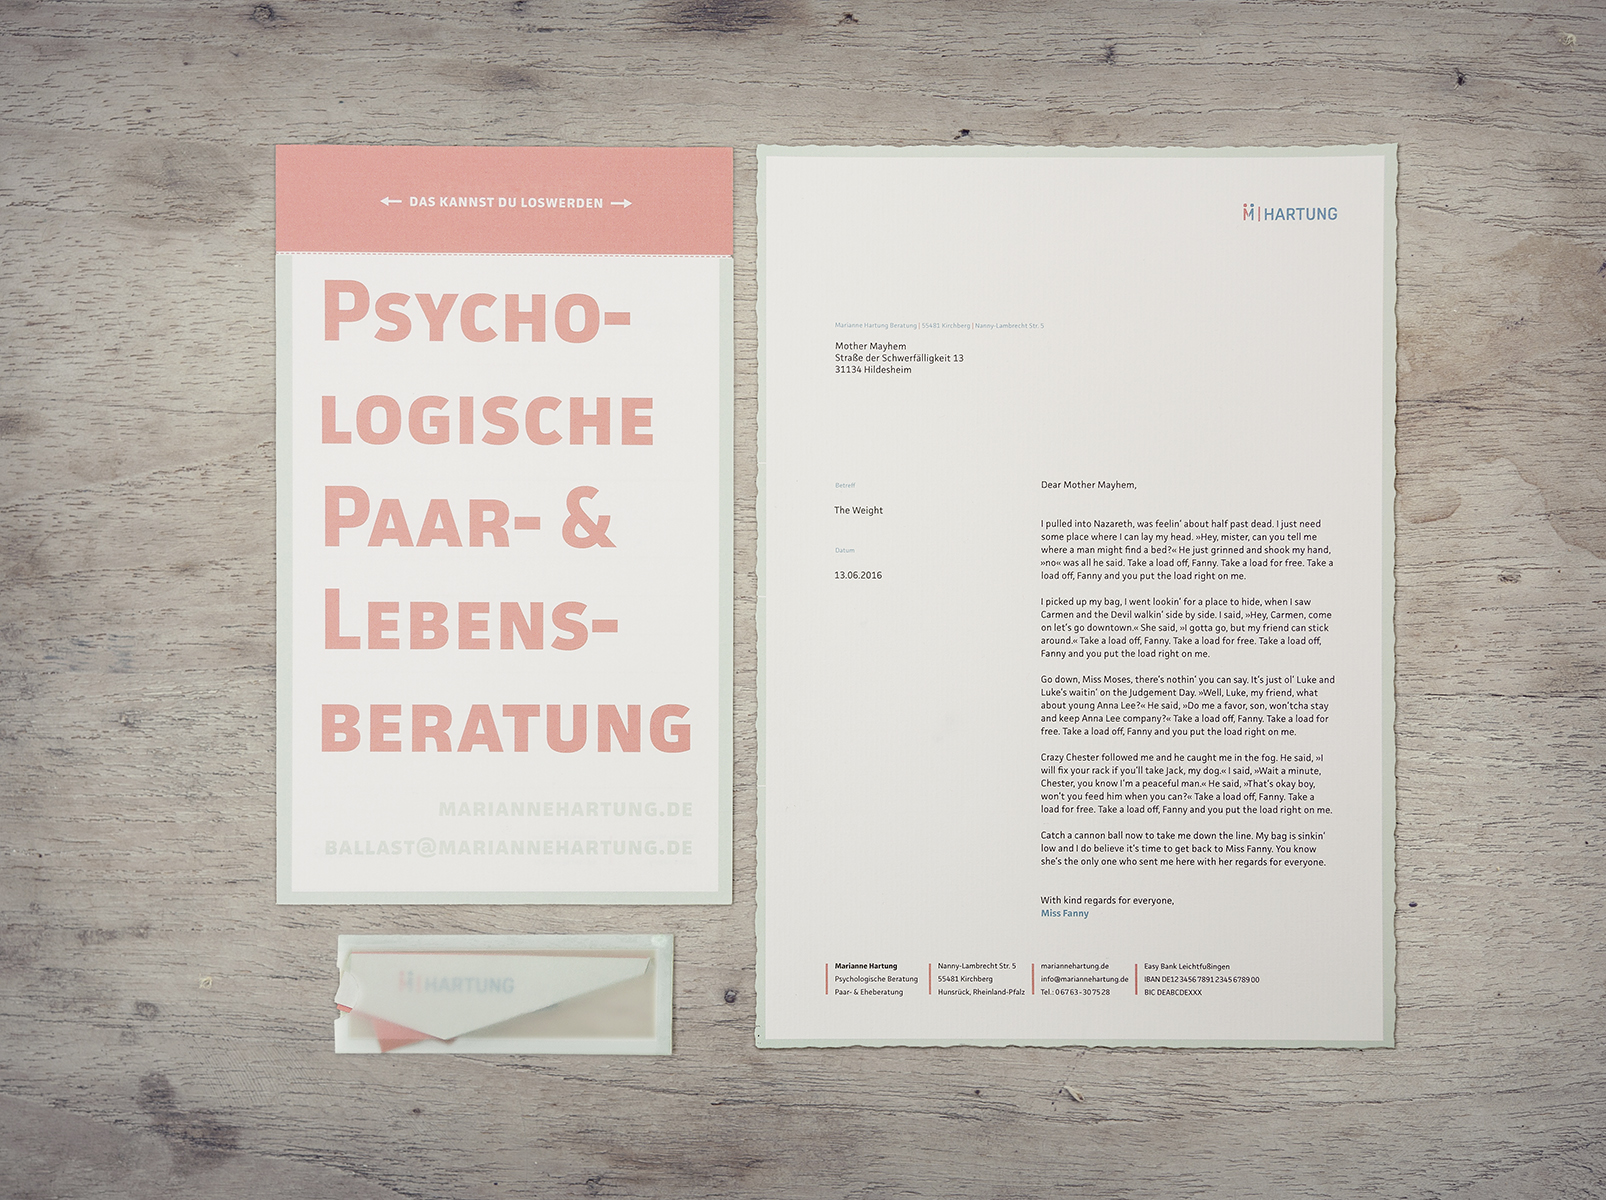 »M | Hartung« corporate stationery.